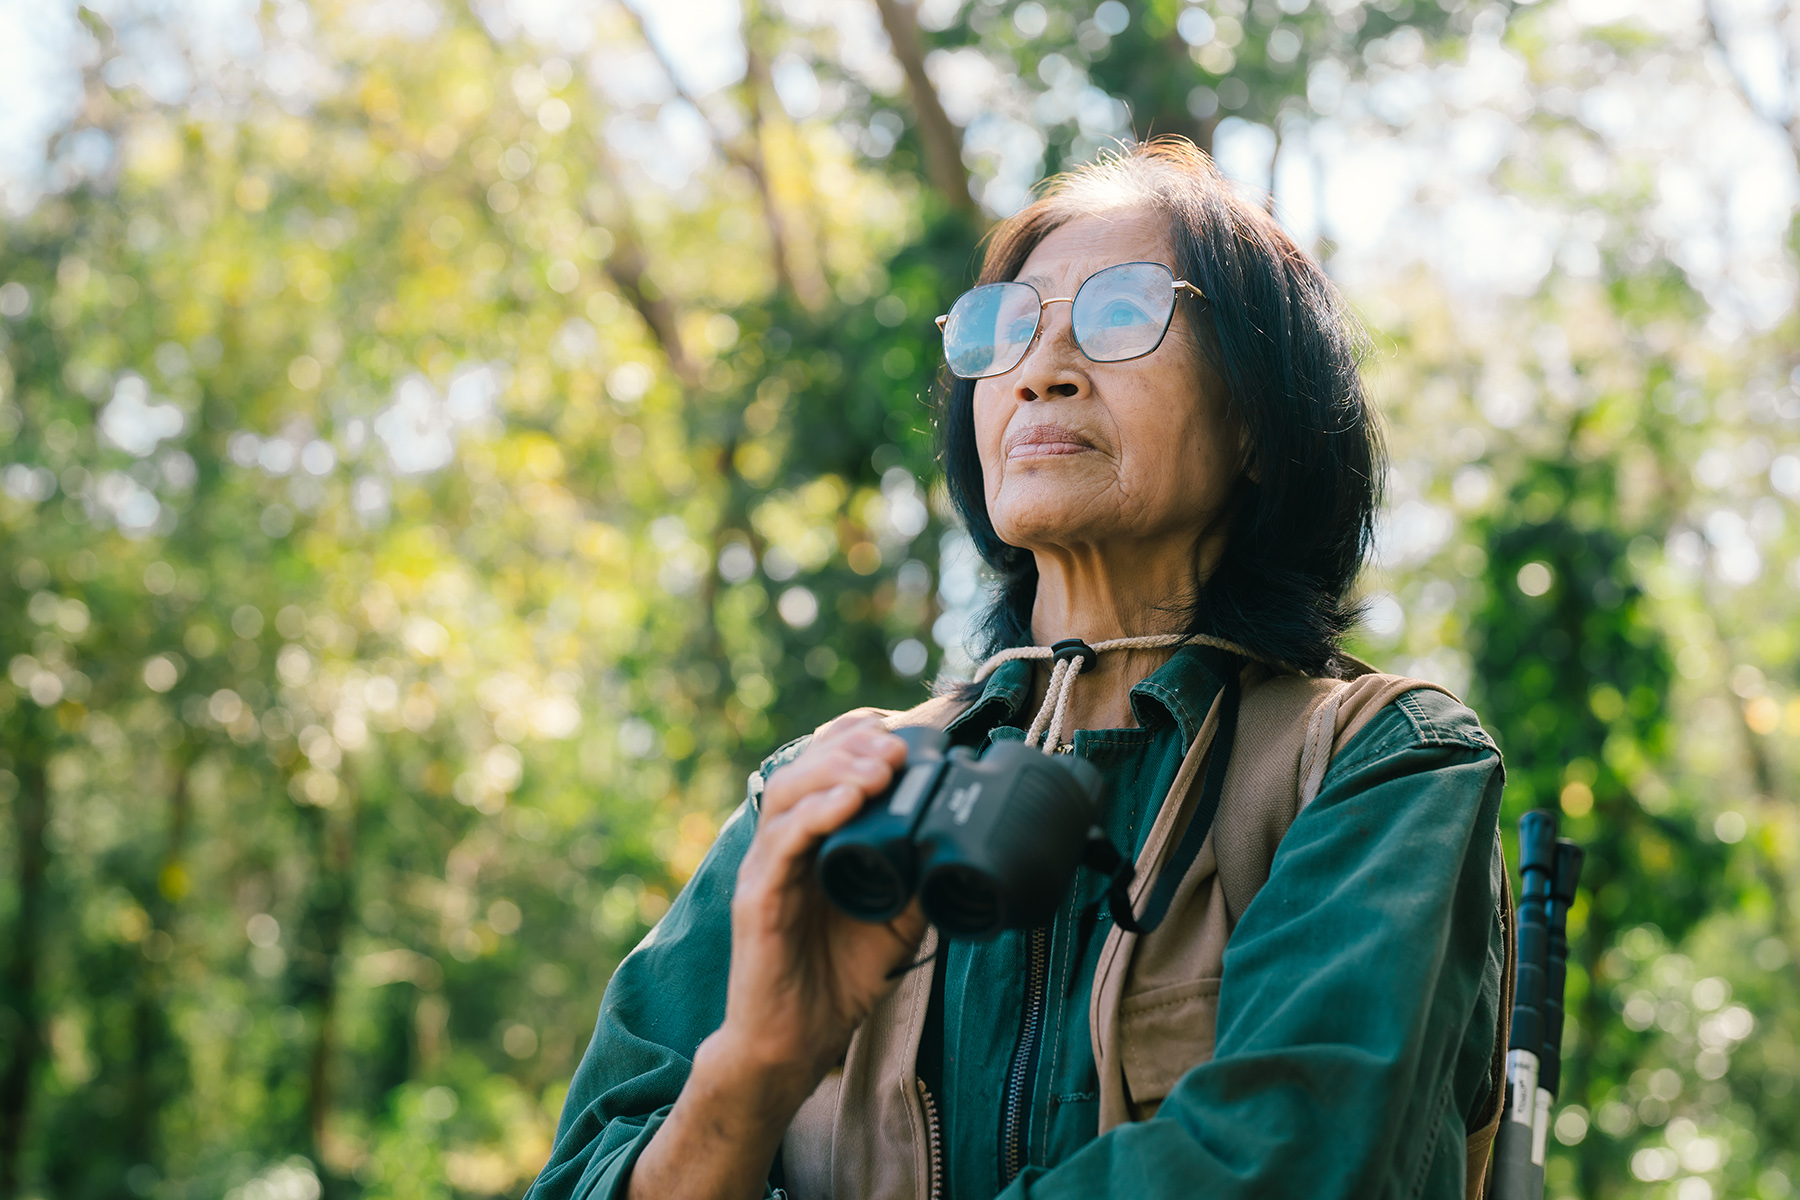 A retired woman in Thailand, with binoculars around her neck, enjoying the outdoors.  

